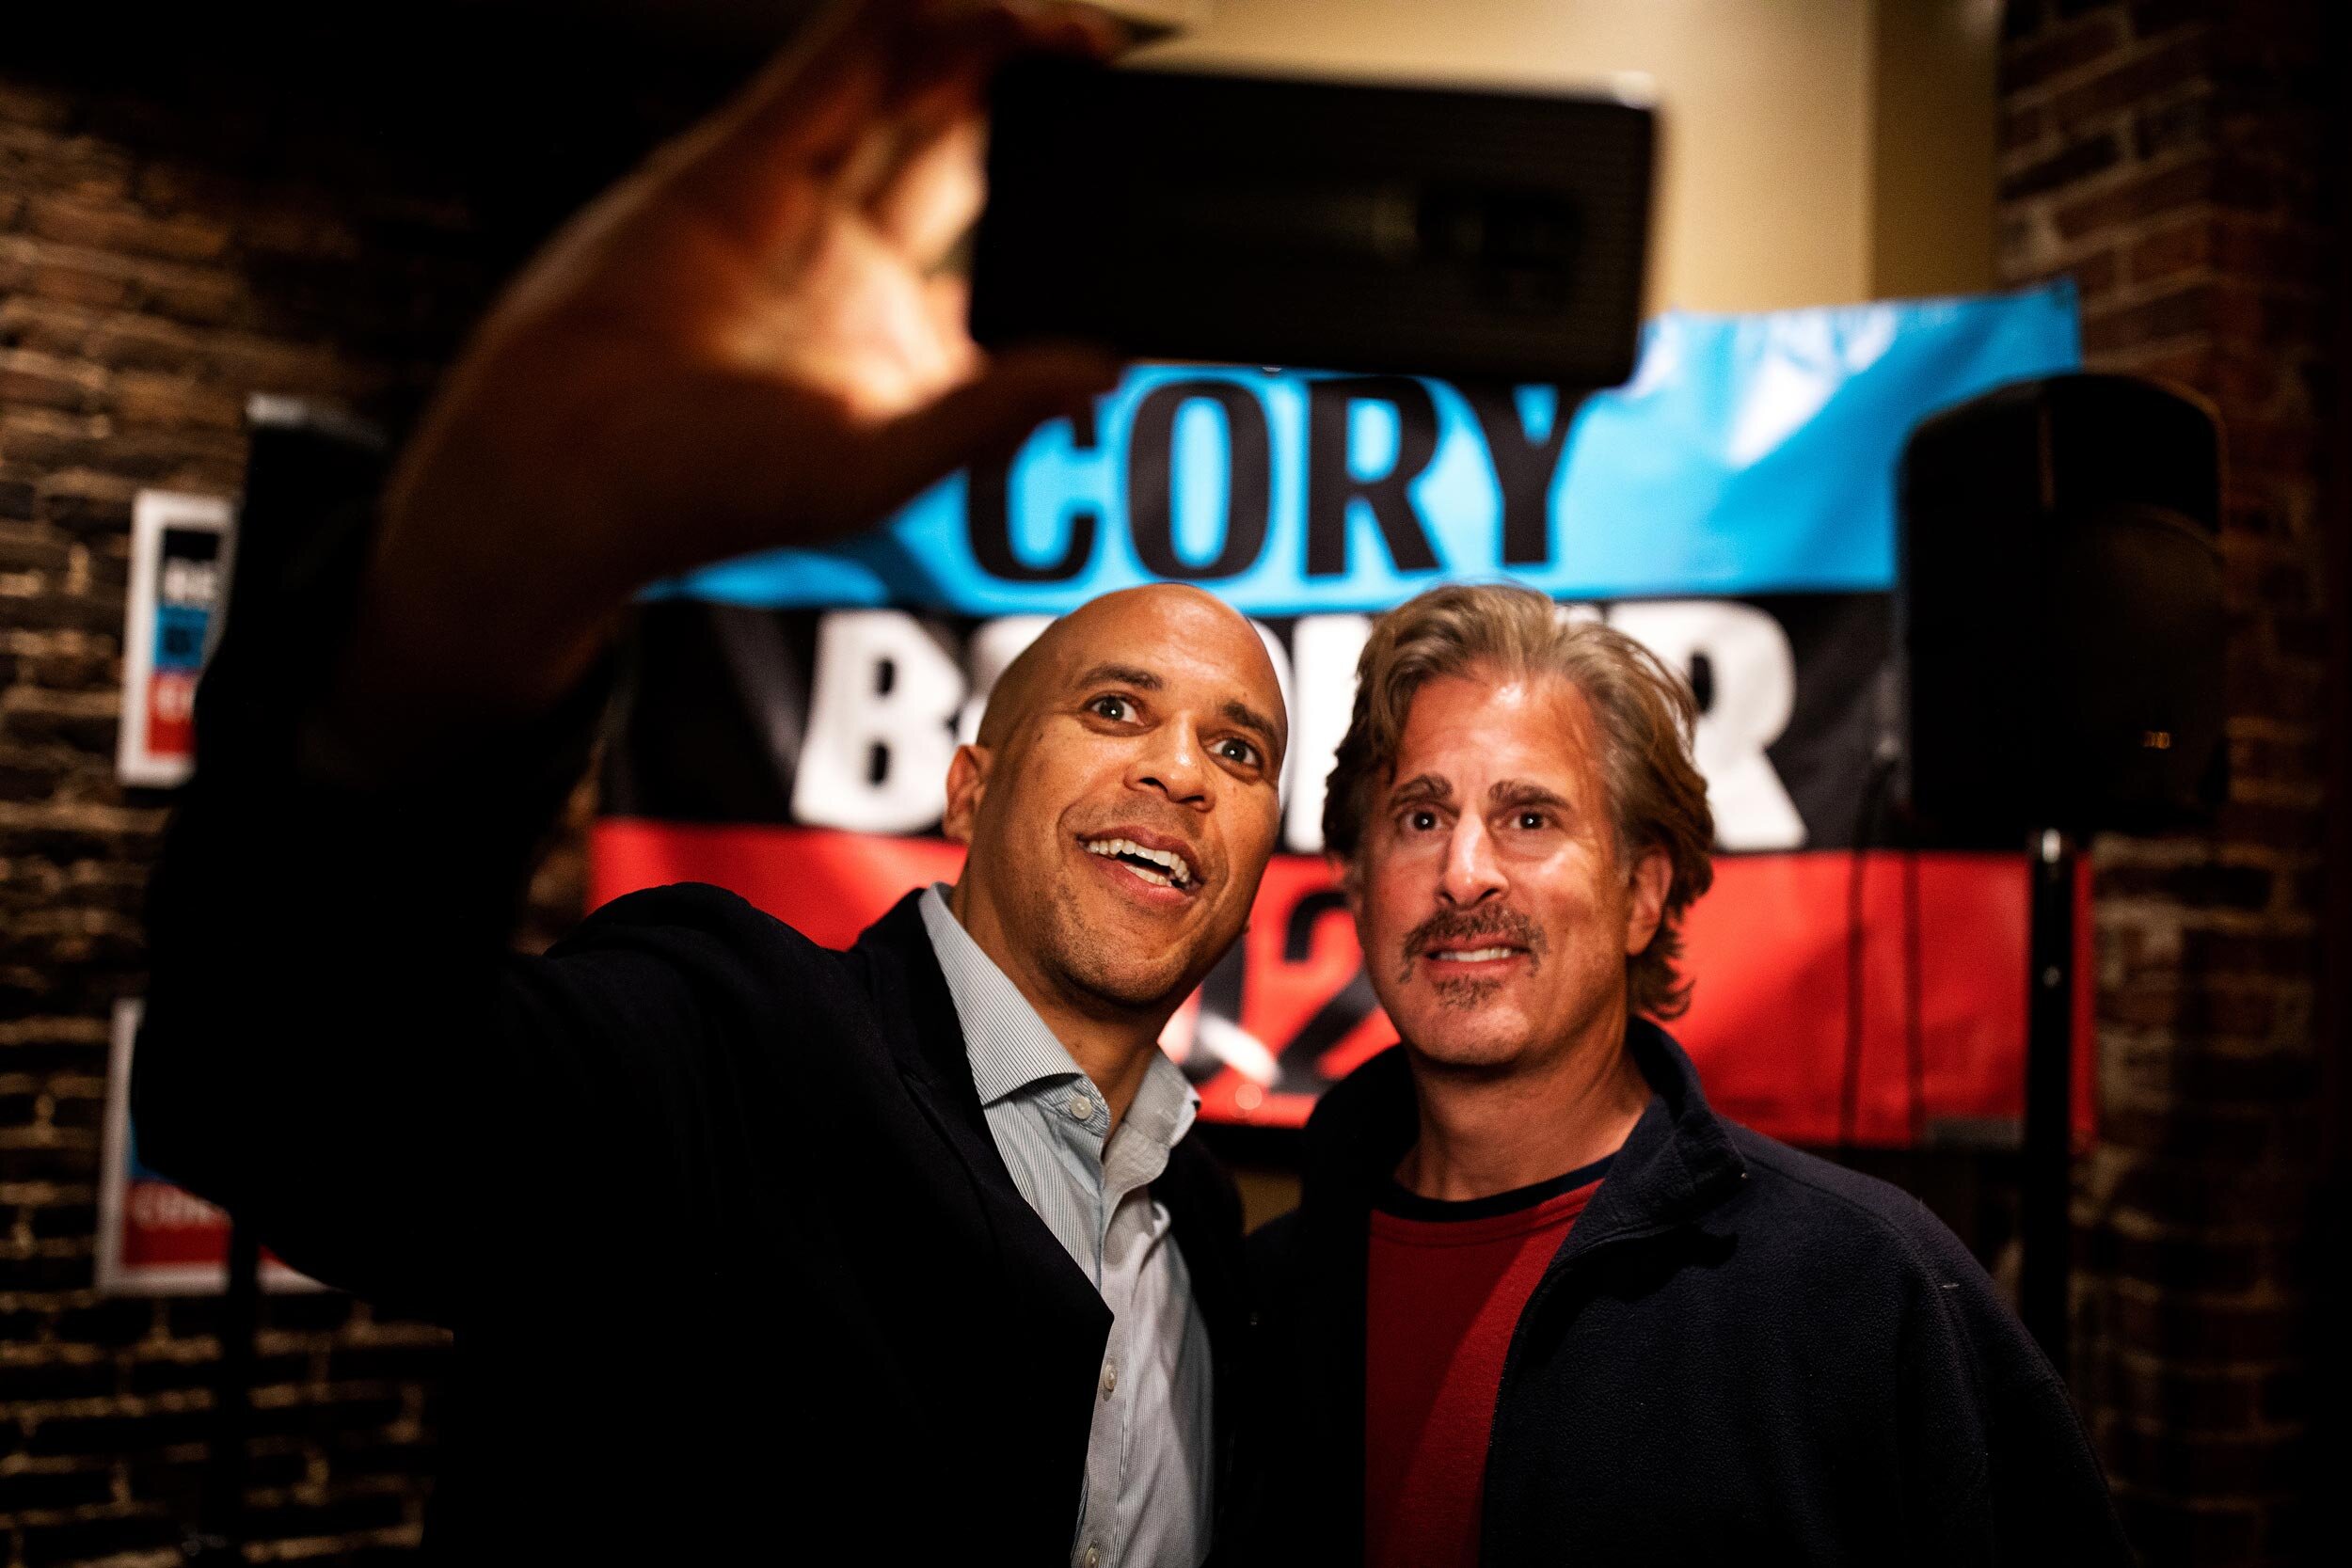  Democratic candidate, Cory Booker, takes a selfie during a meet and greet with voters at the Portsmouth Brewery in Portsmouth, New Hampshire.    